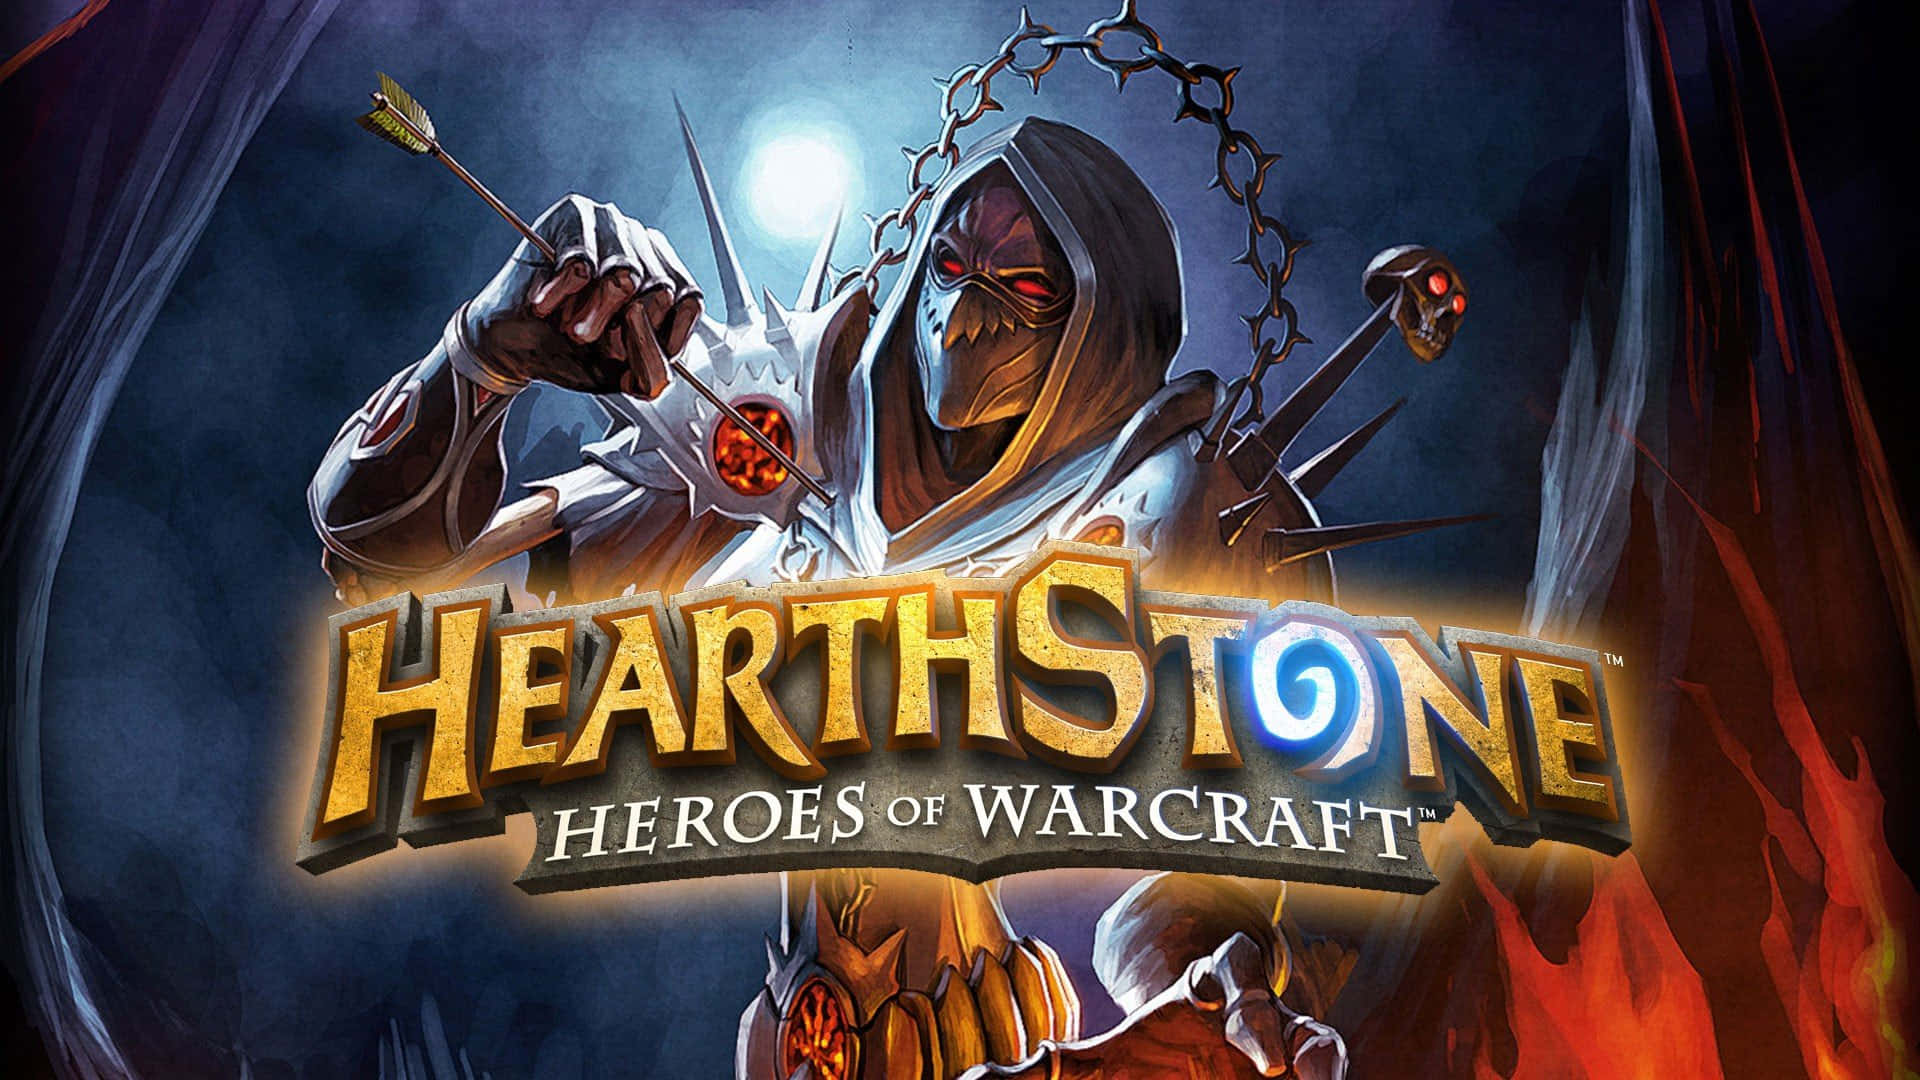 370 Hearthstone Heroes of Warcraft HD Wallpapers and Backgrounds